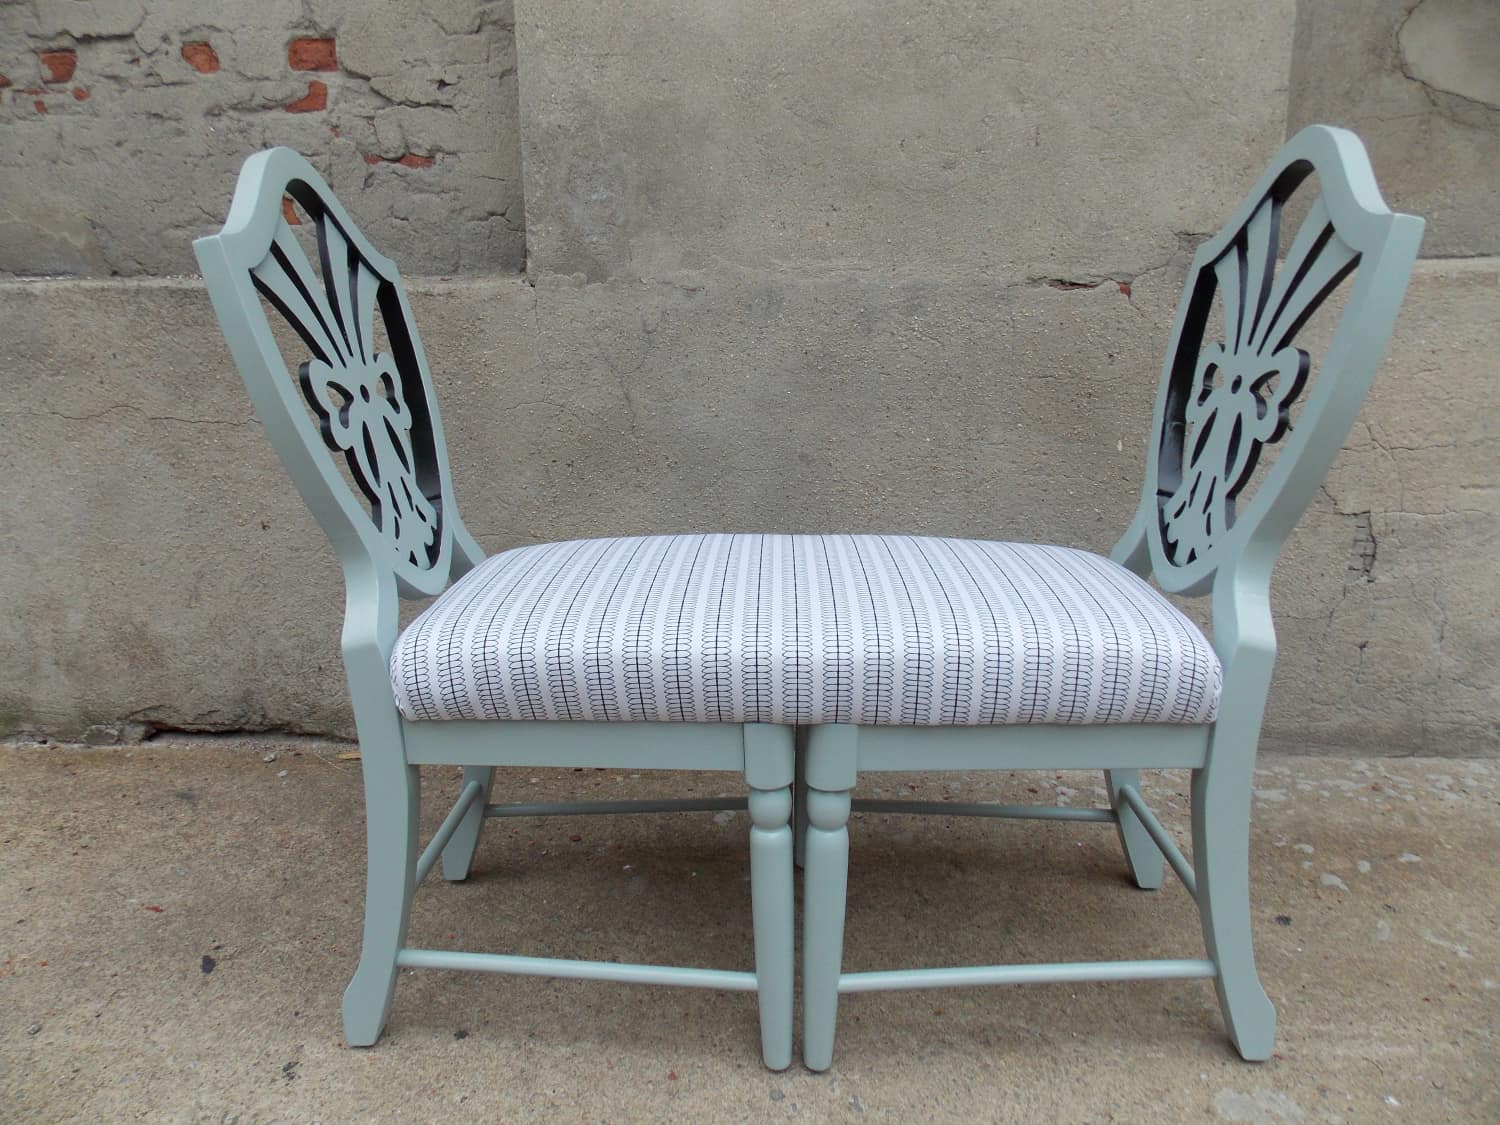 Upholstered Bench Made From Two Chairs - Apartment Therapy's Bazaar.